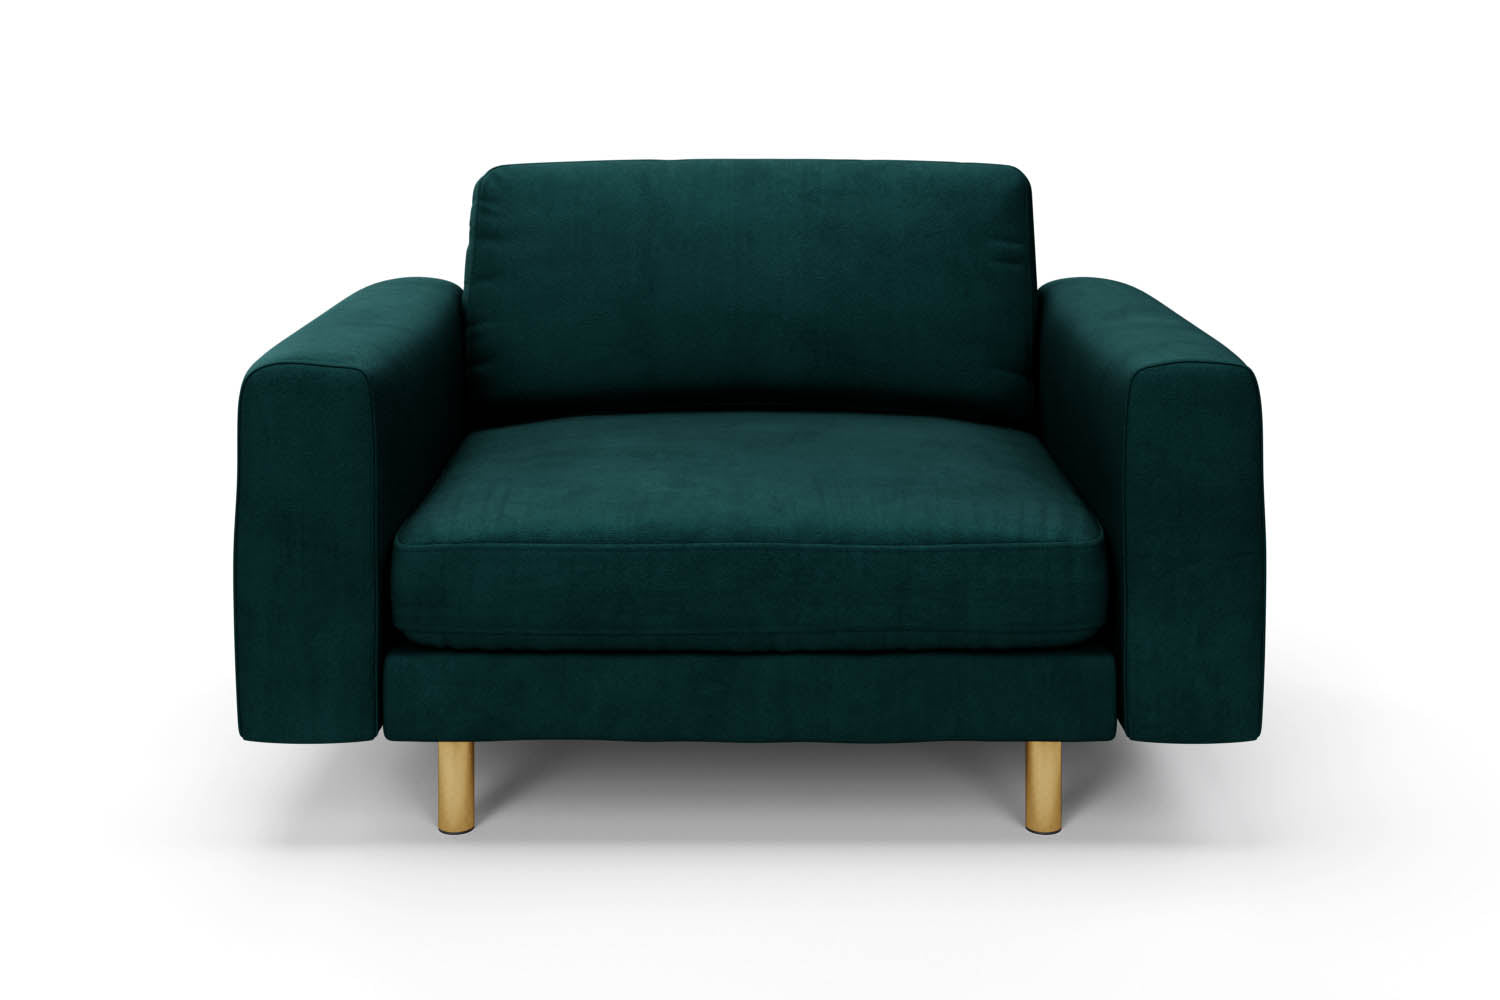 SNUG | The Big Chill 1.5 Seater Snuggler in Pine Green variant_40837198315568